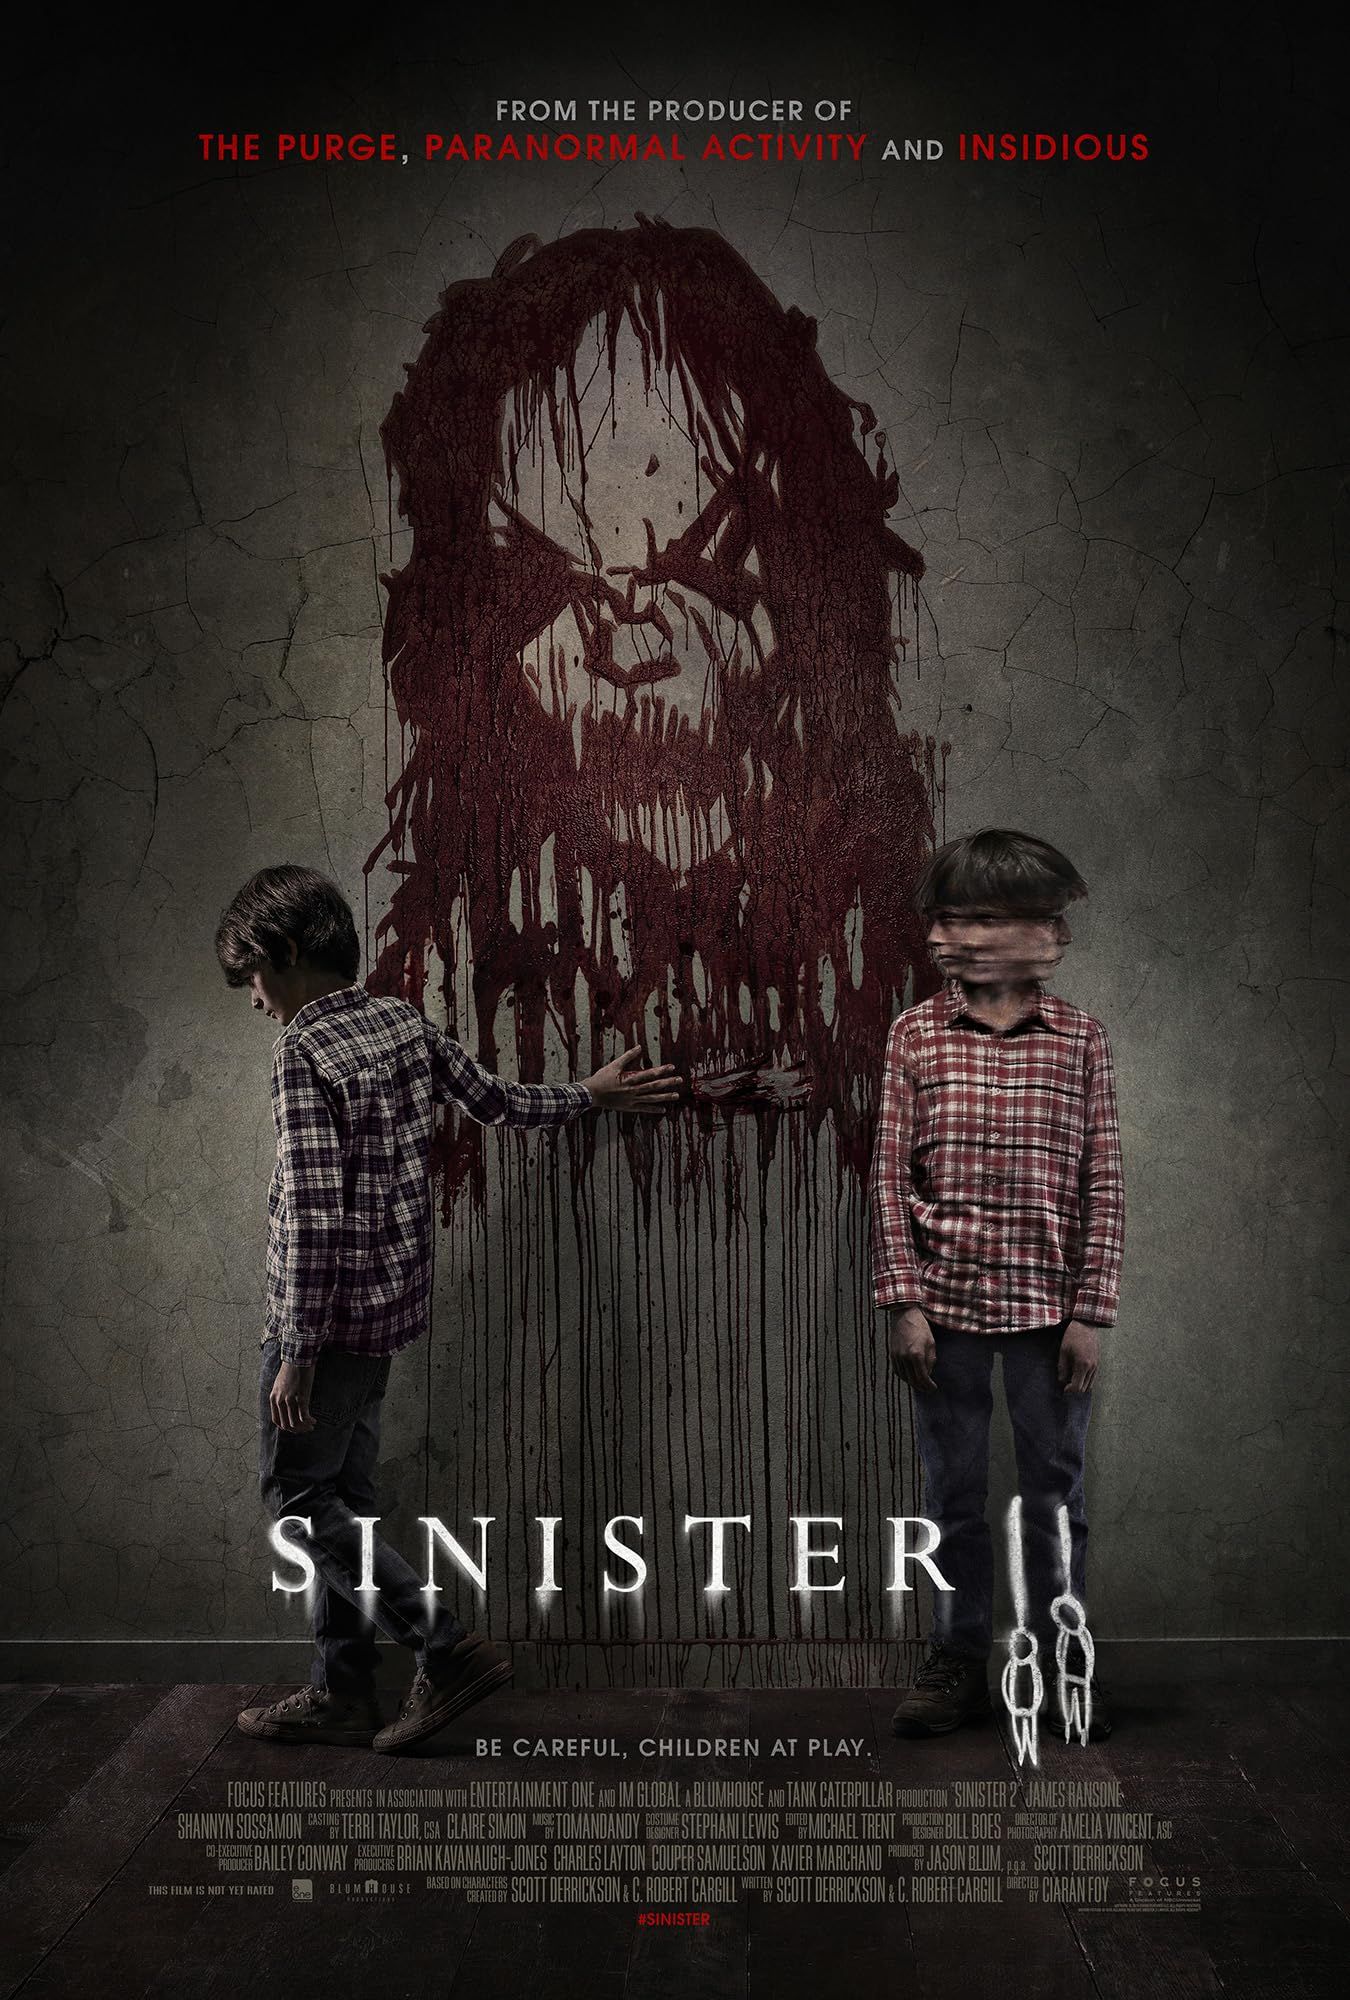 Sinister 2 (2015) Hindi Dubbed Movie download full movie